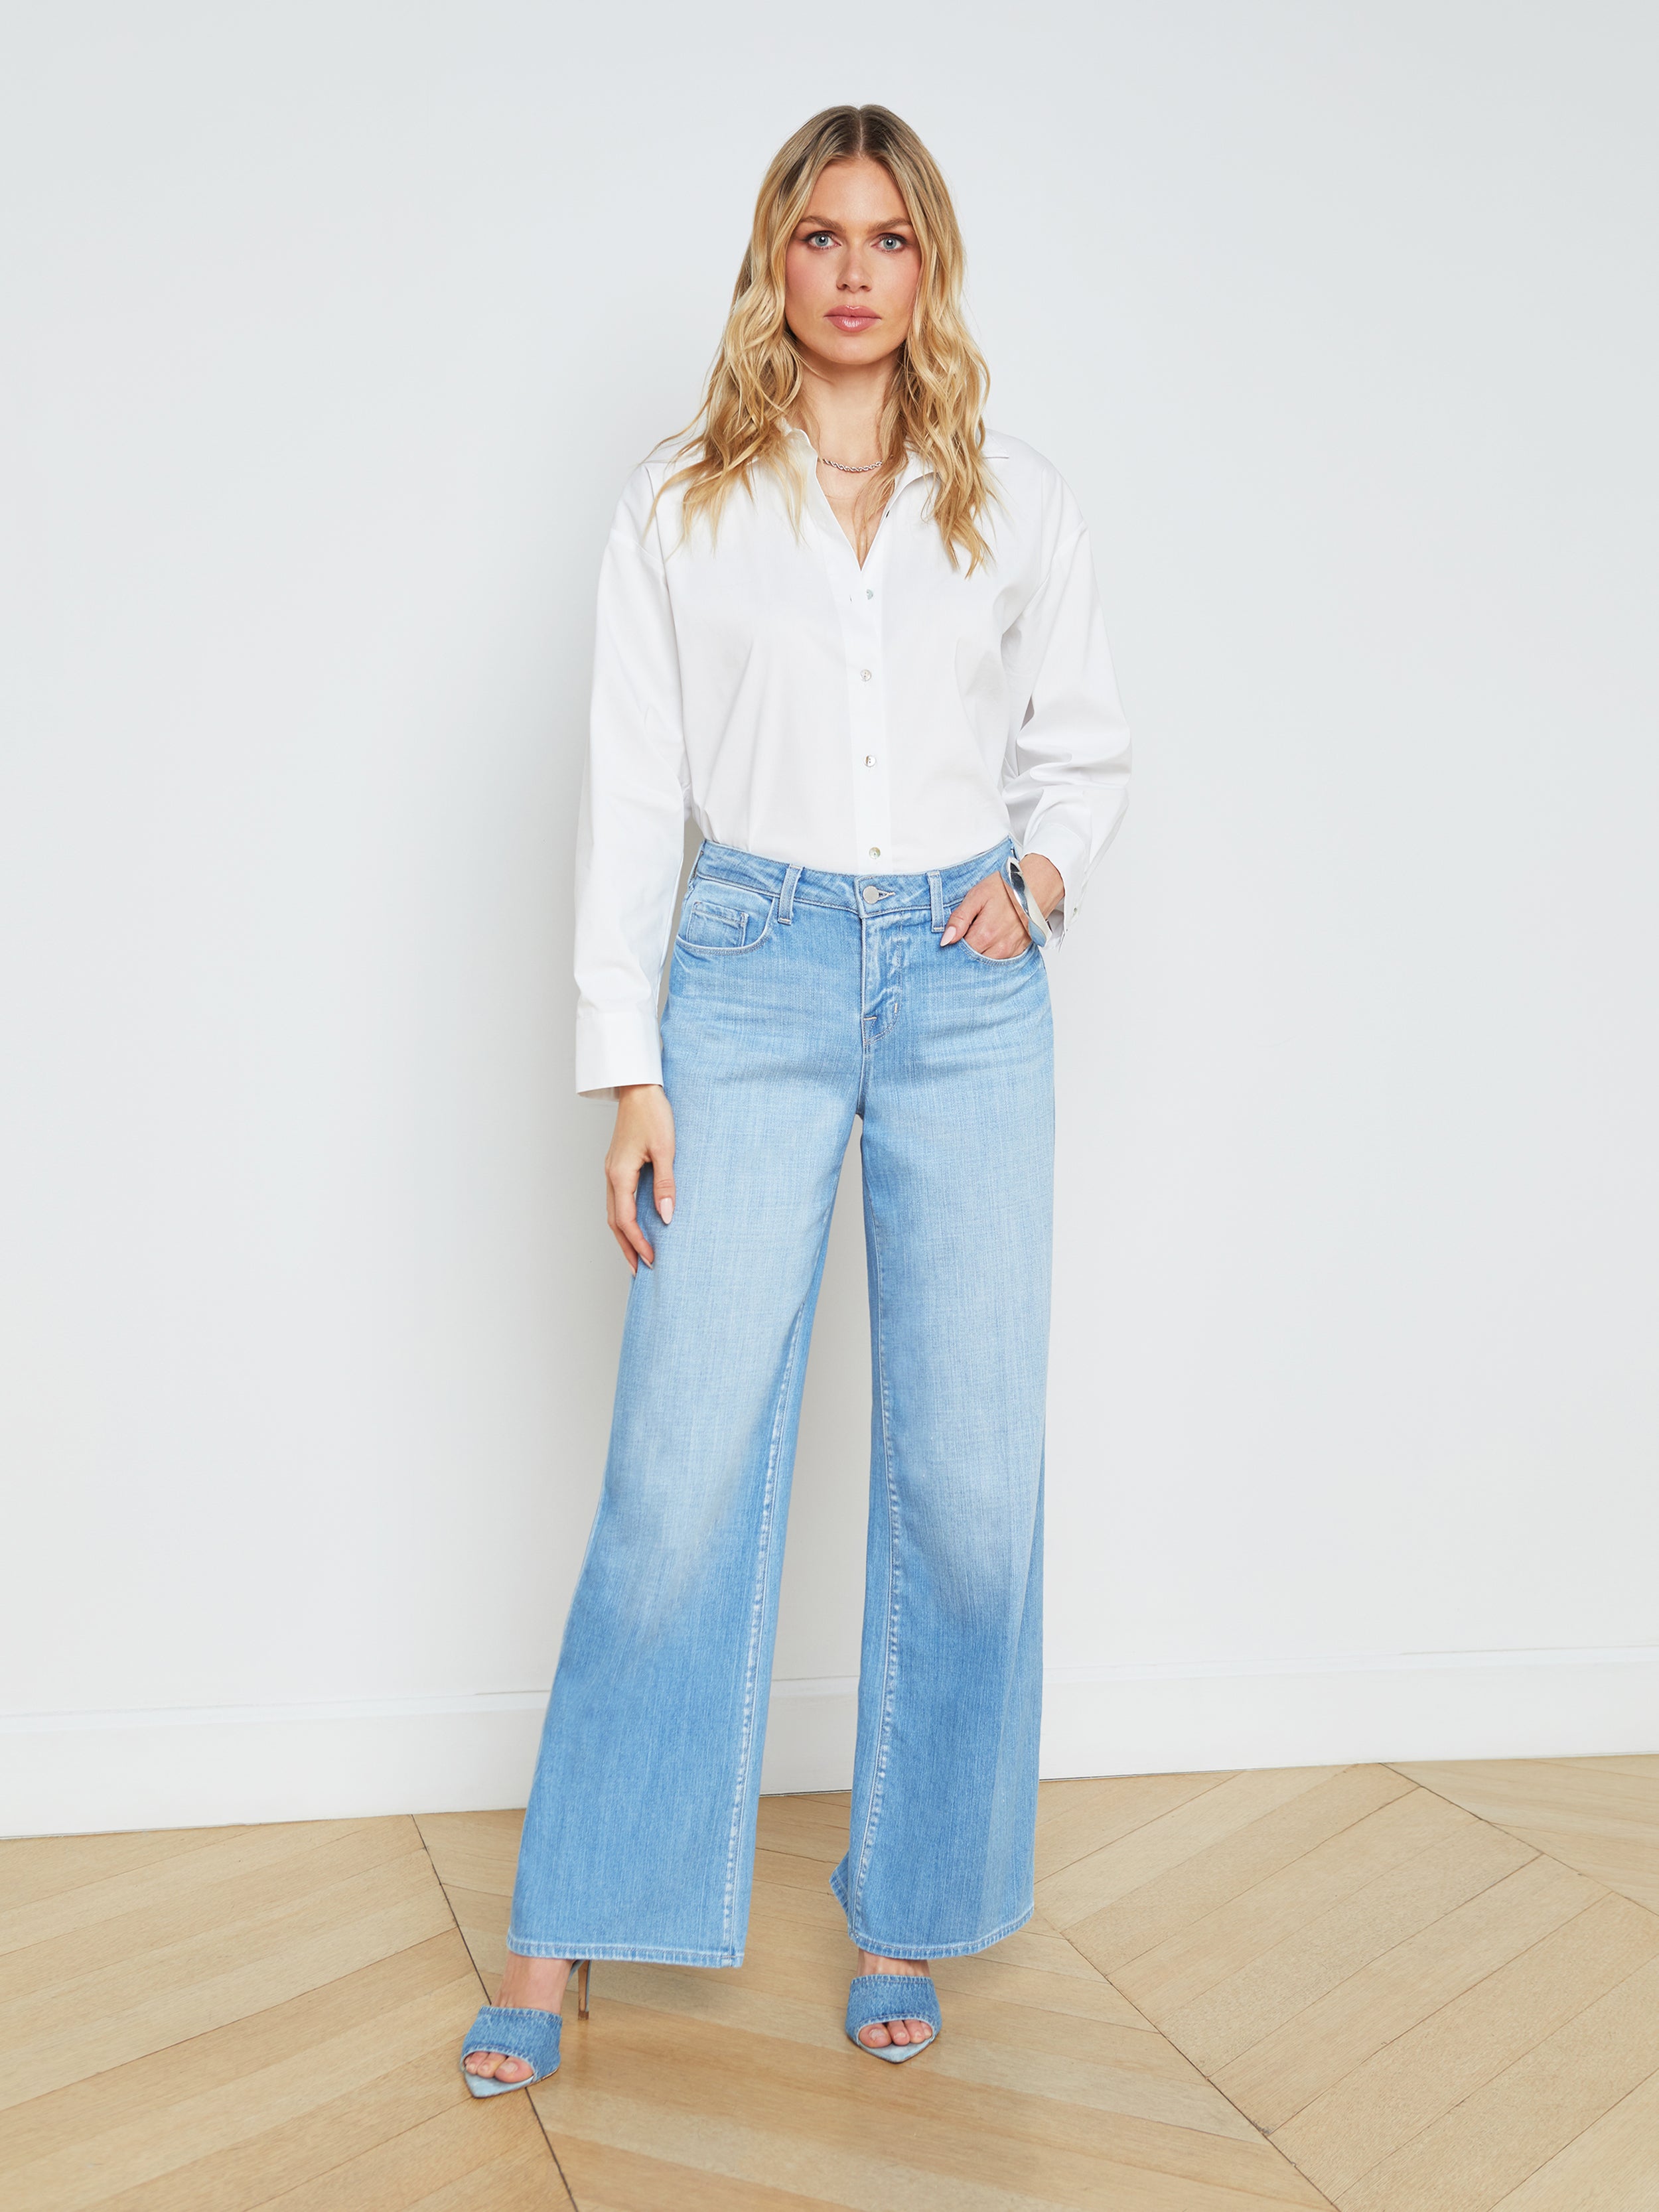 Featured: Alicent Wide-Leg Jean